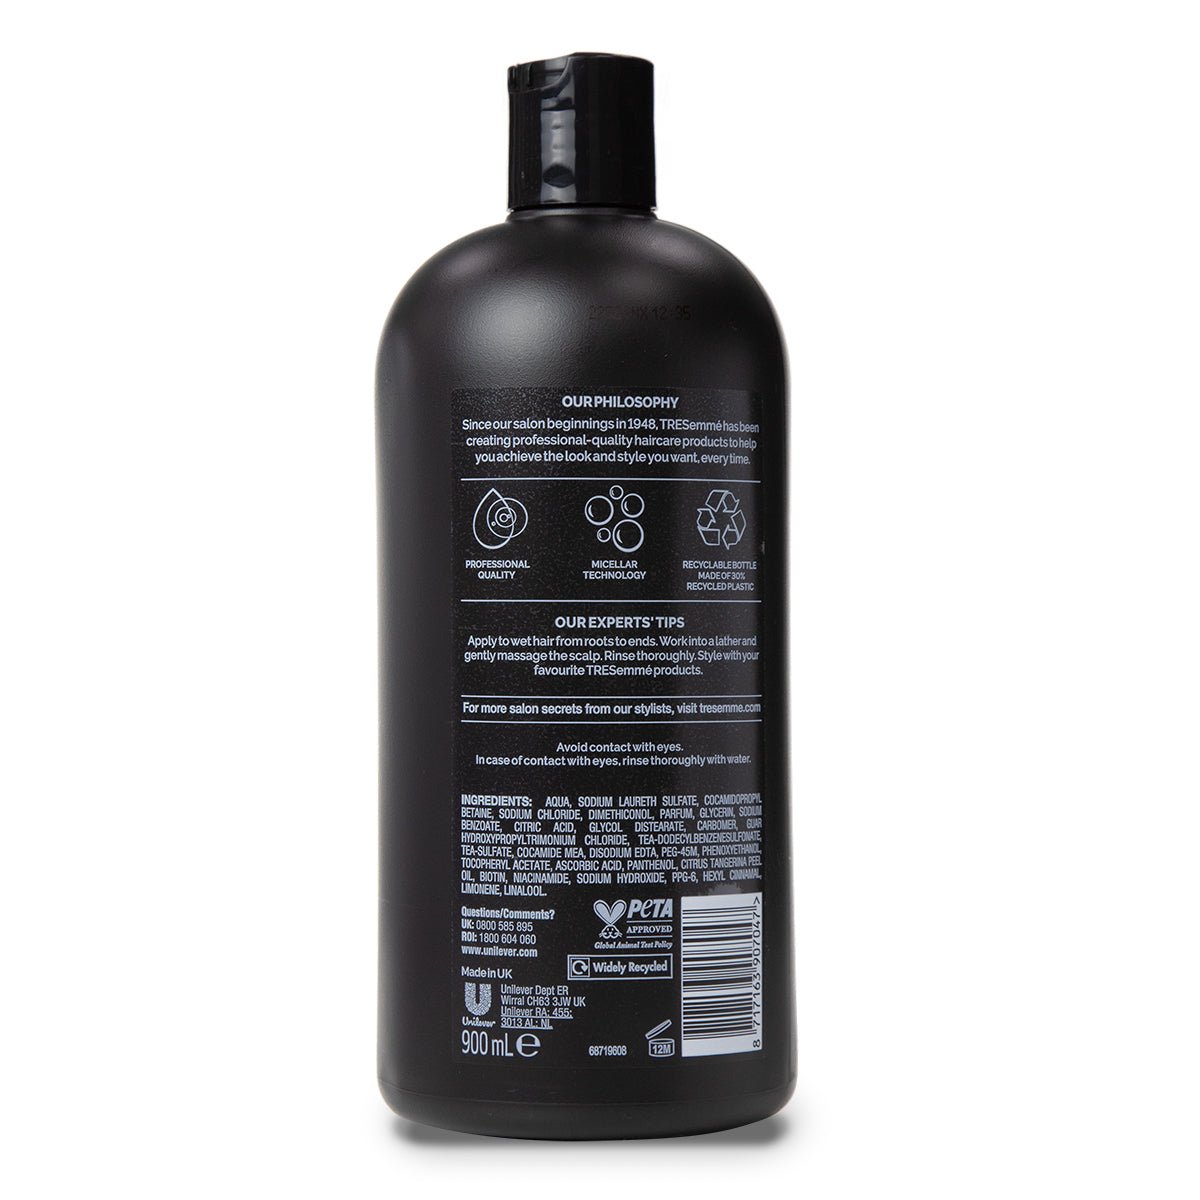 Tresemme 900ml Shampoo Cleanse & Replenish 2 in 1 - Intamarque 8717163907047